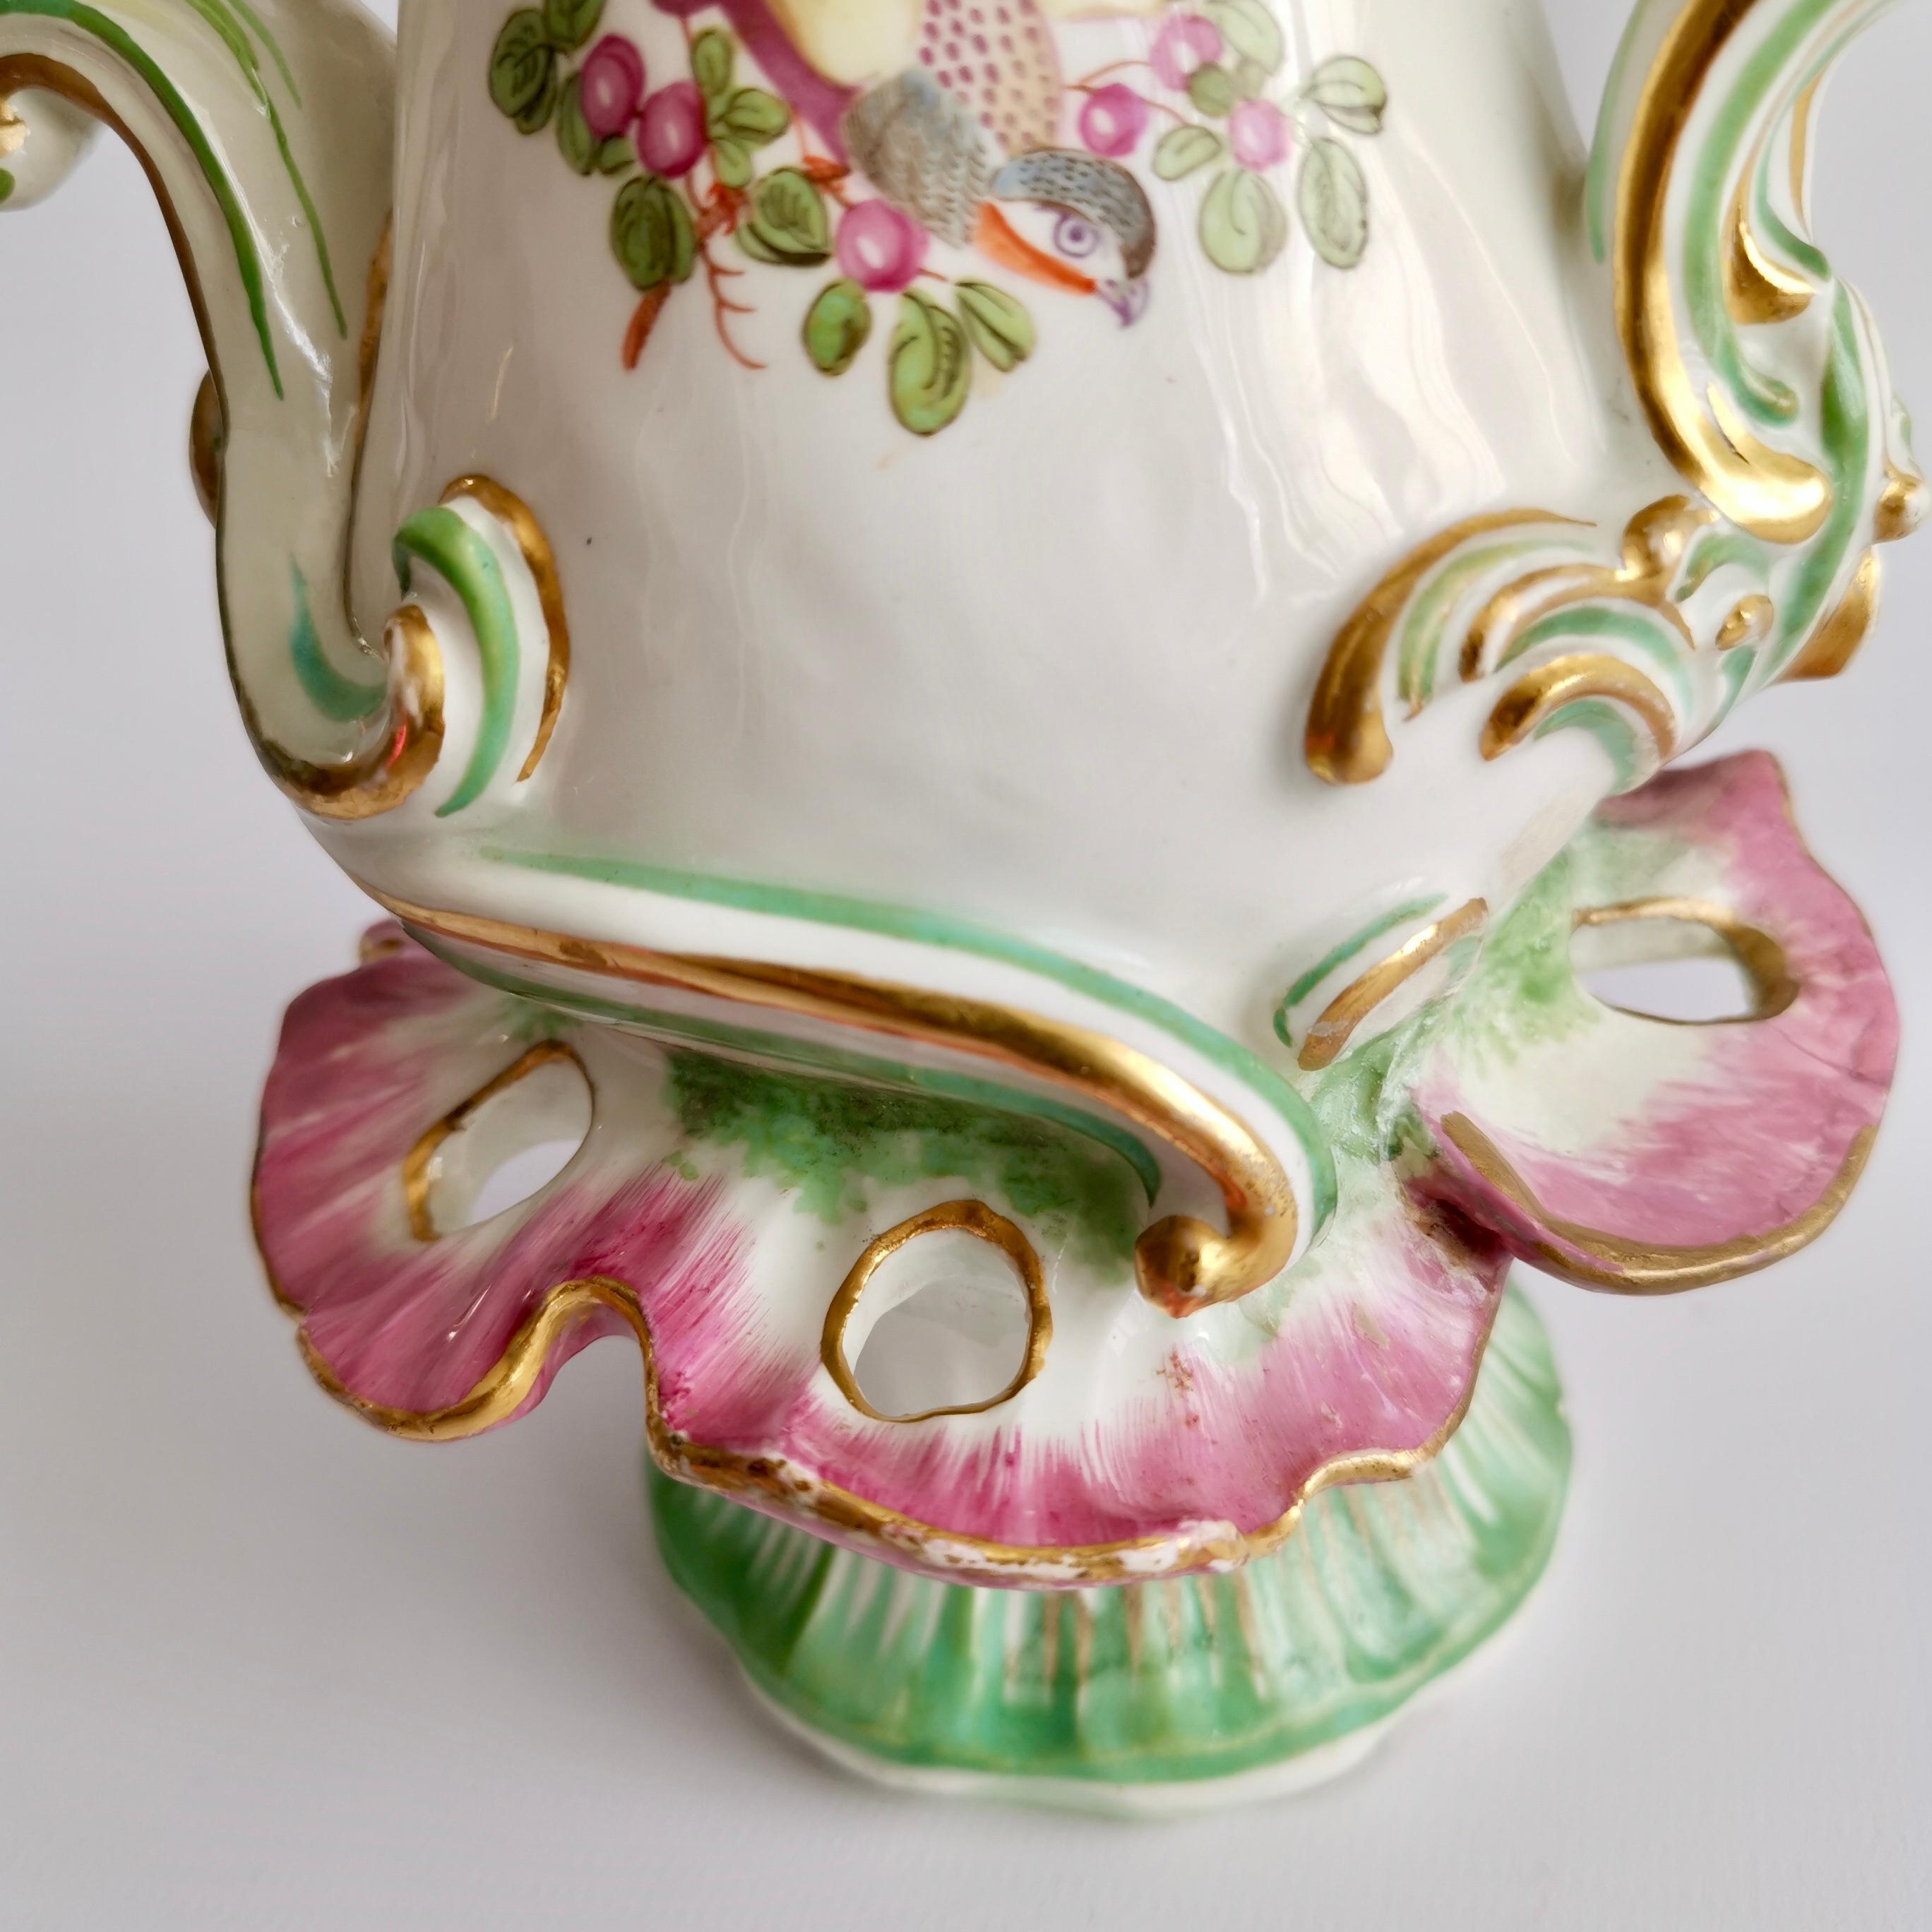 Chelsea Porcelain Frill Vase with Birds, Rococo ca 1760 For Sale 2